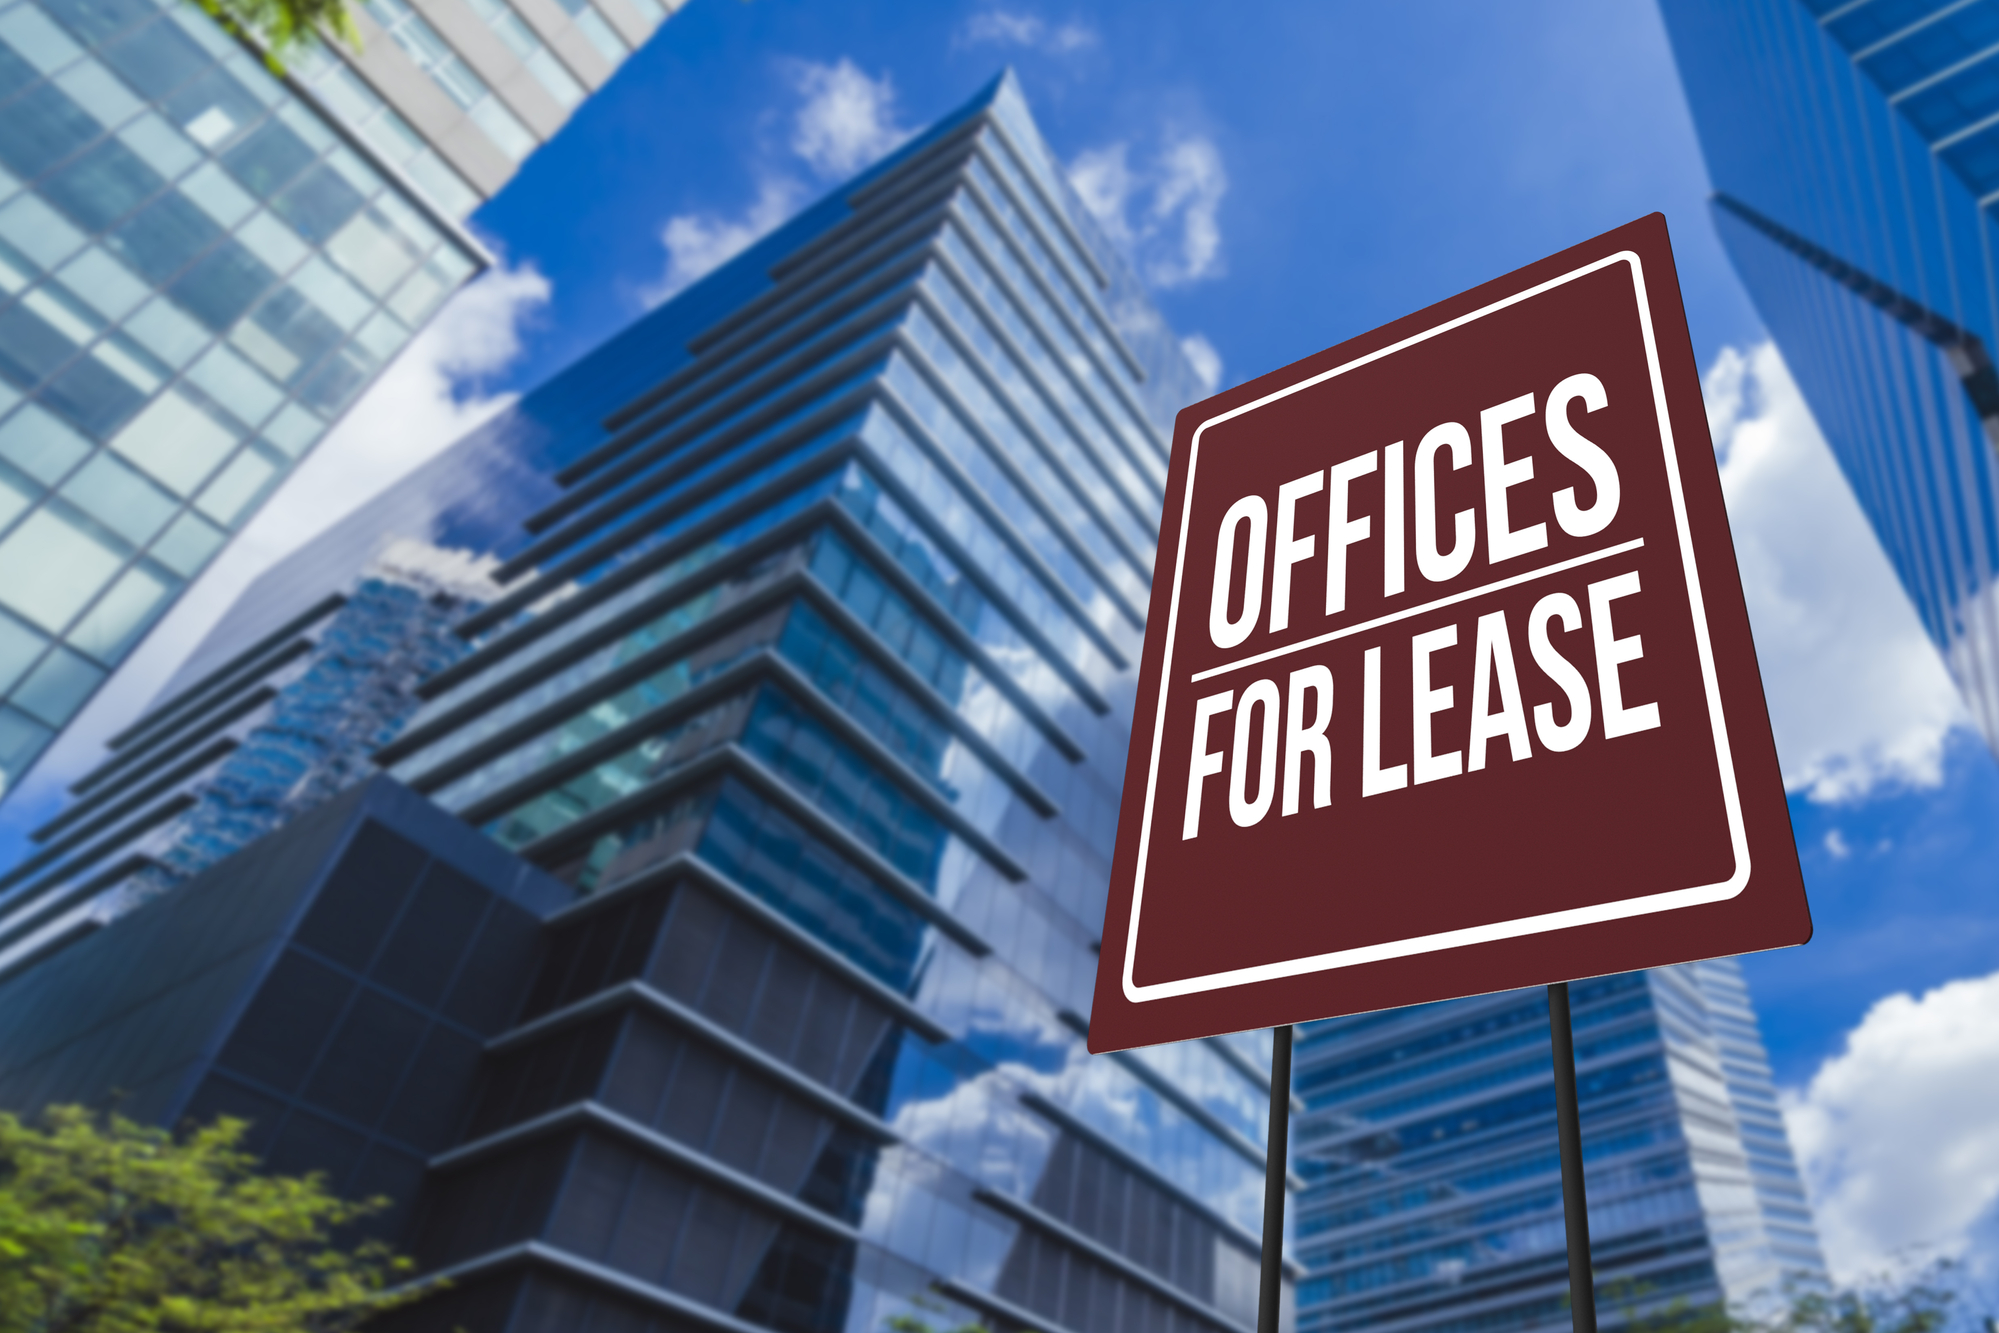 A sign that says offices for lease in front of tall buildings.